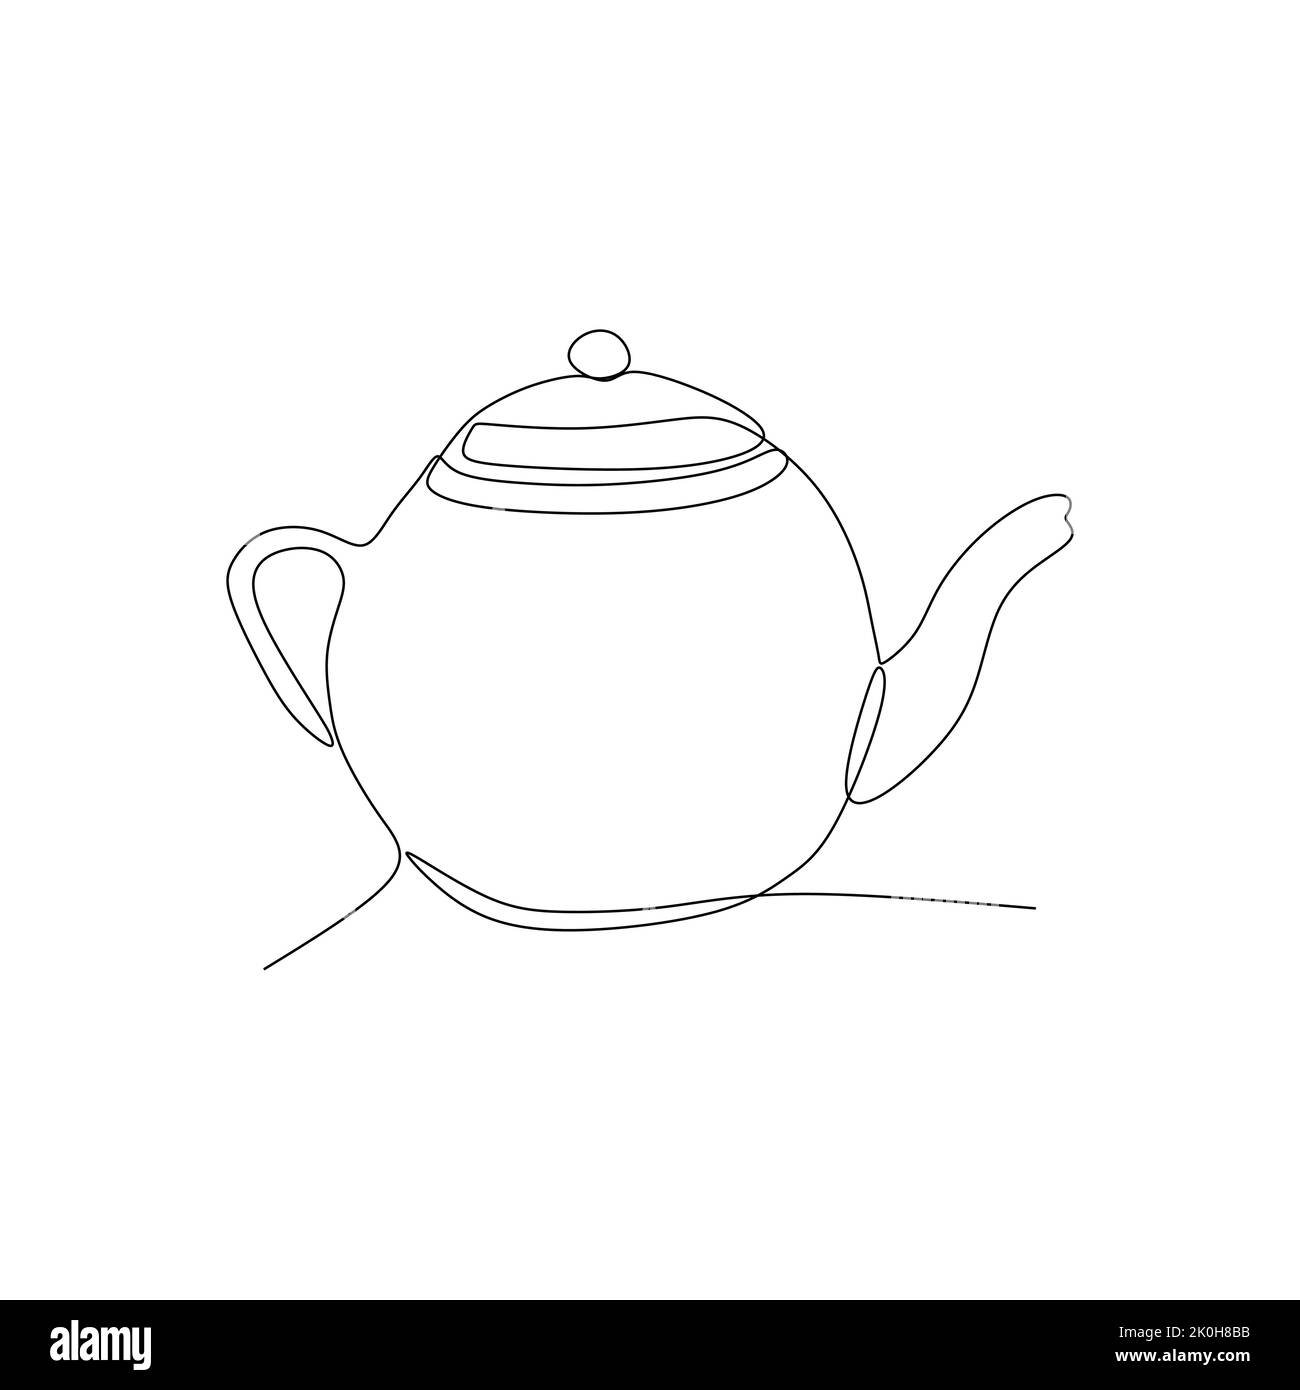 Ceramic coffee hot water teapot isolated on white background - Simple continuous one line drawing vector illustration for food and beverages concept Stock Vector